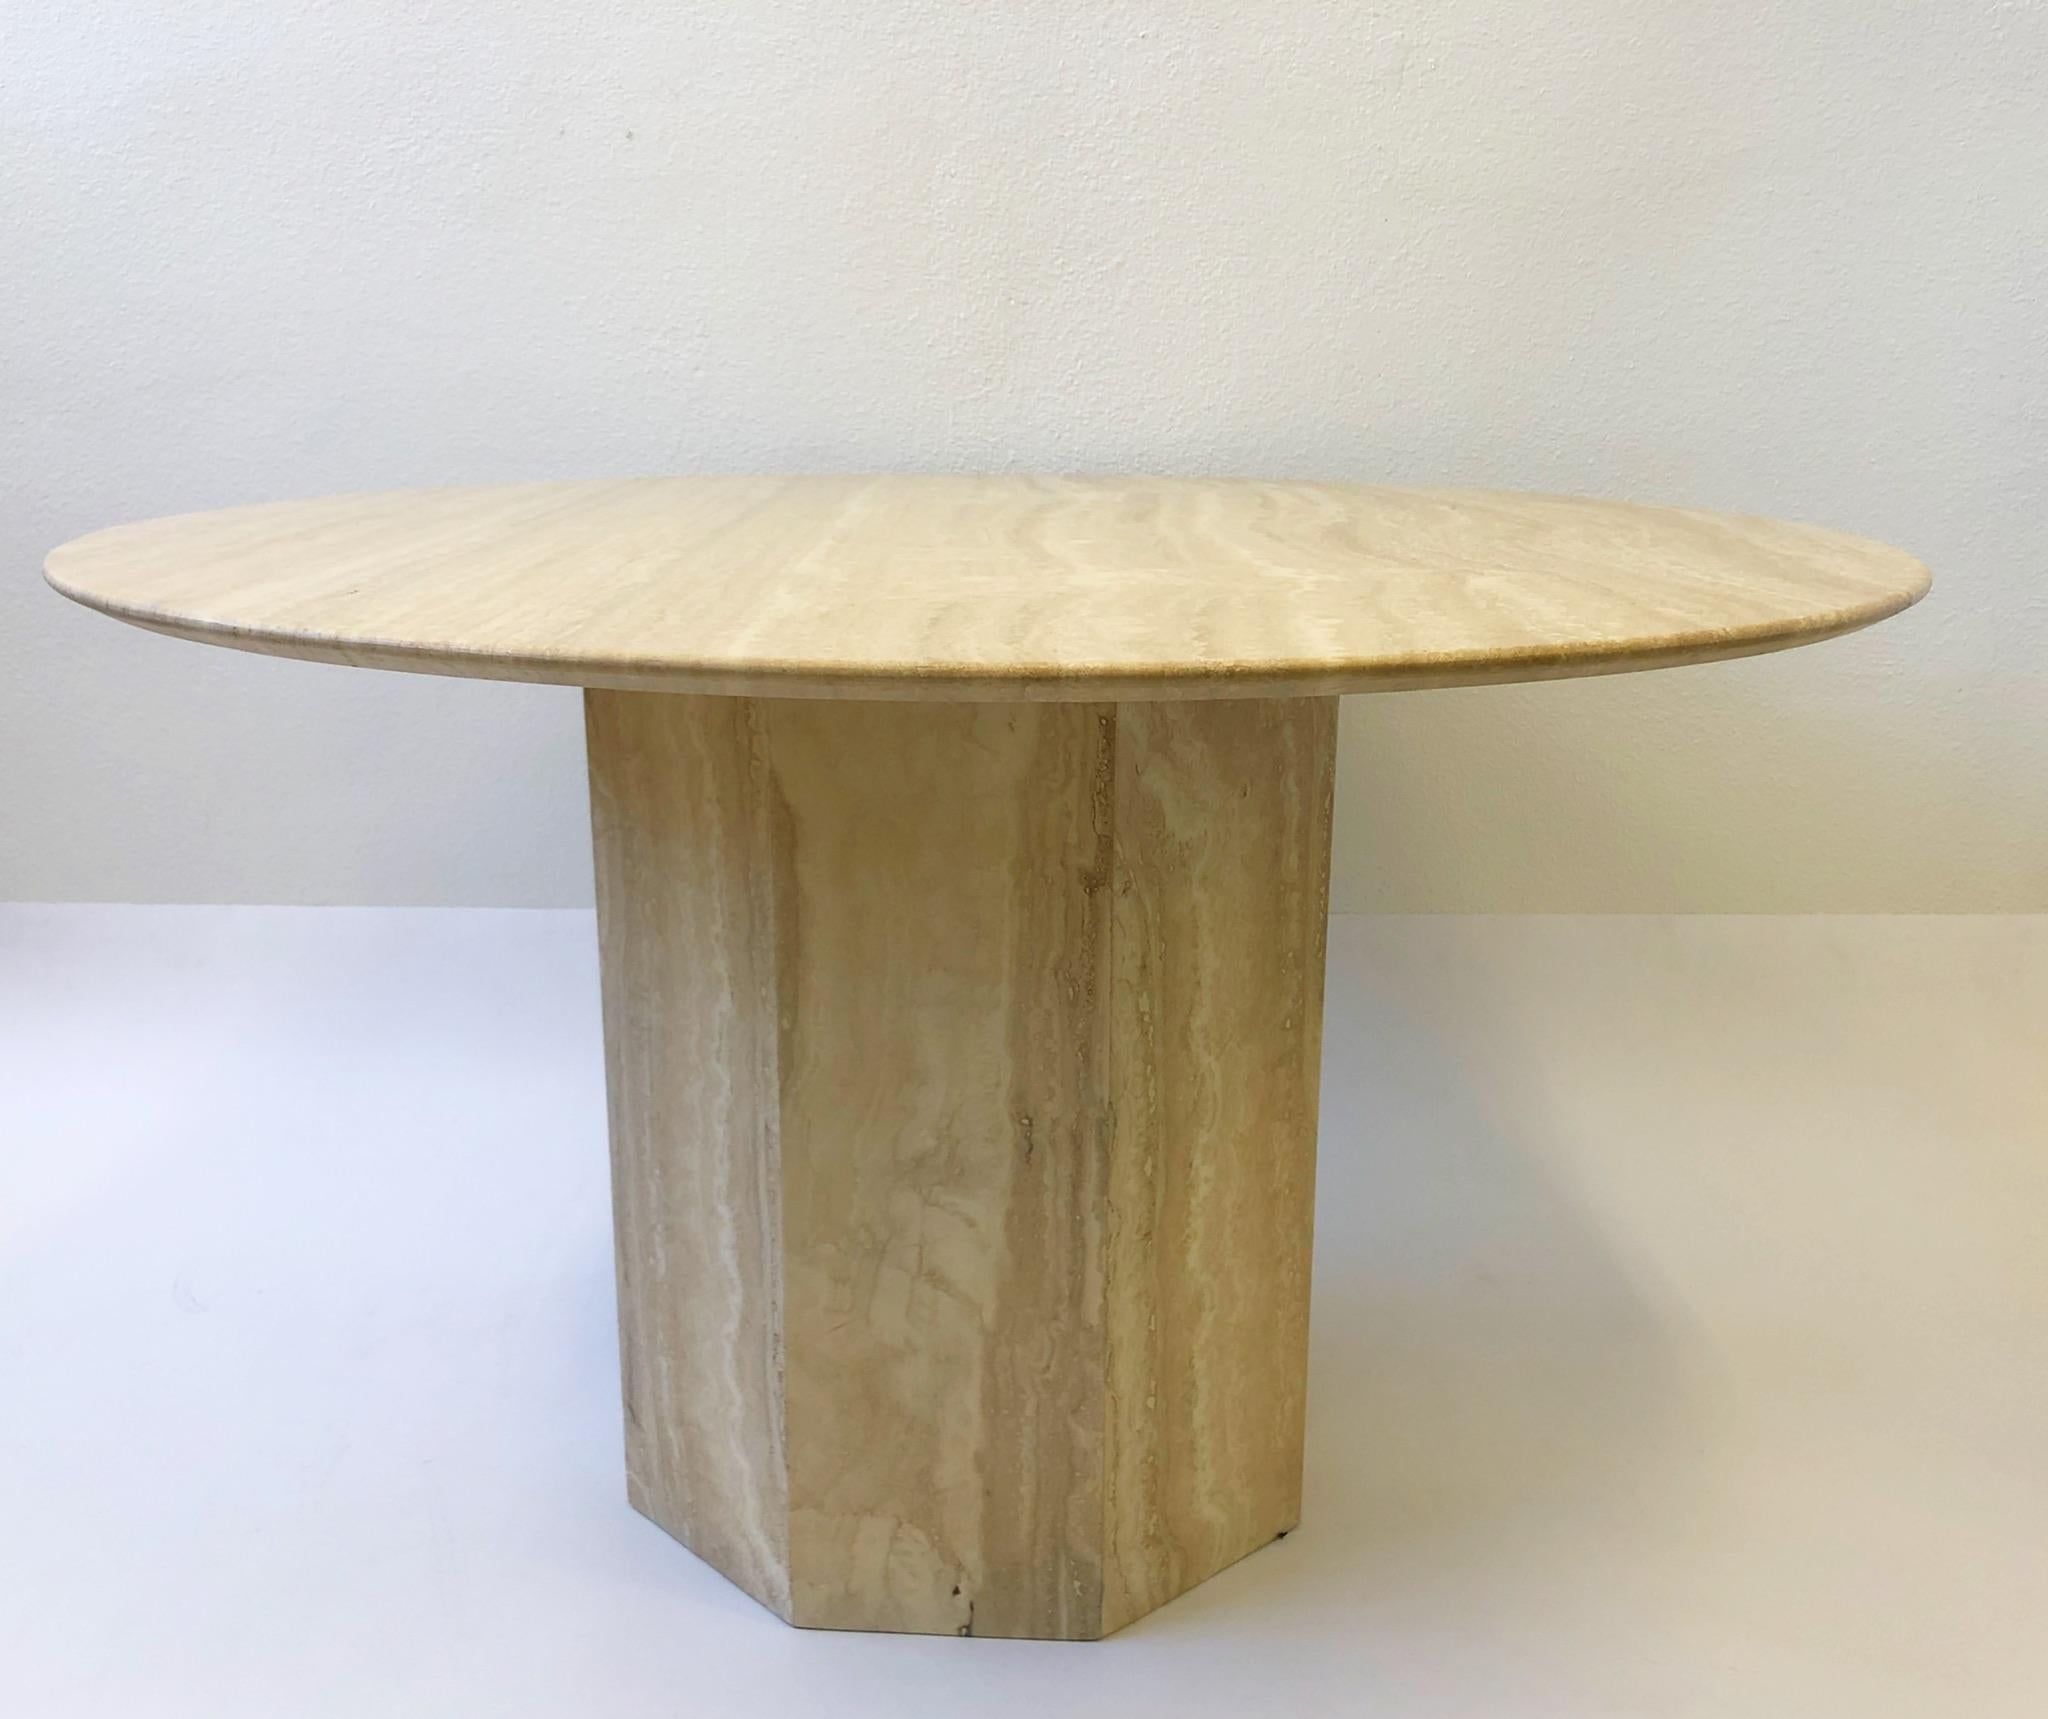 A glamorous 1970s Italian travertine round dining table with an octagonal shape base. The top has a knife edge.
Overall dimensions: 47.25” diameter, 28.25” high.